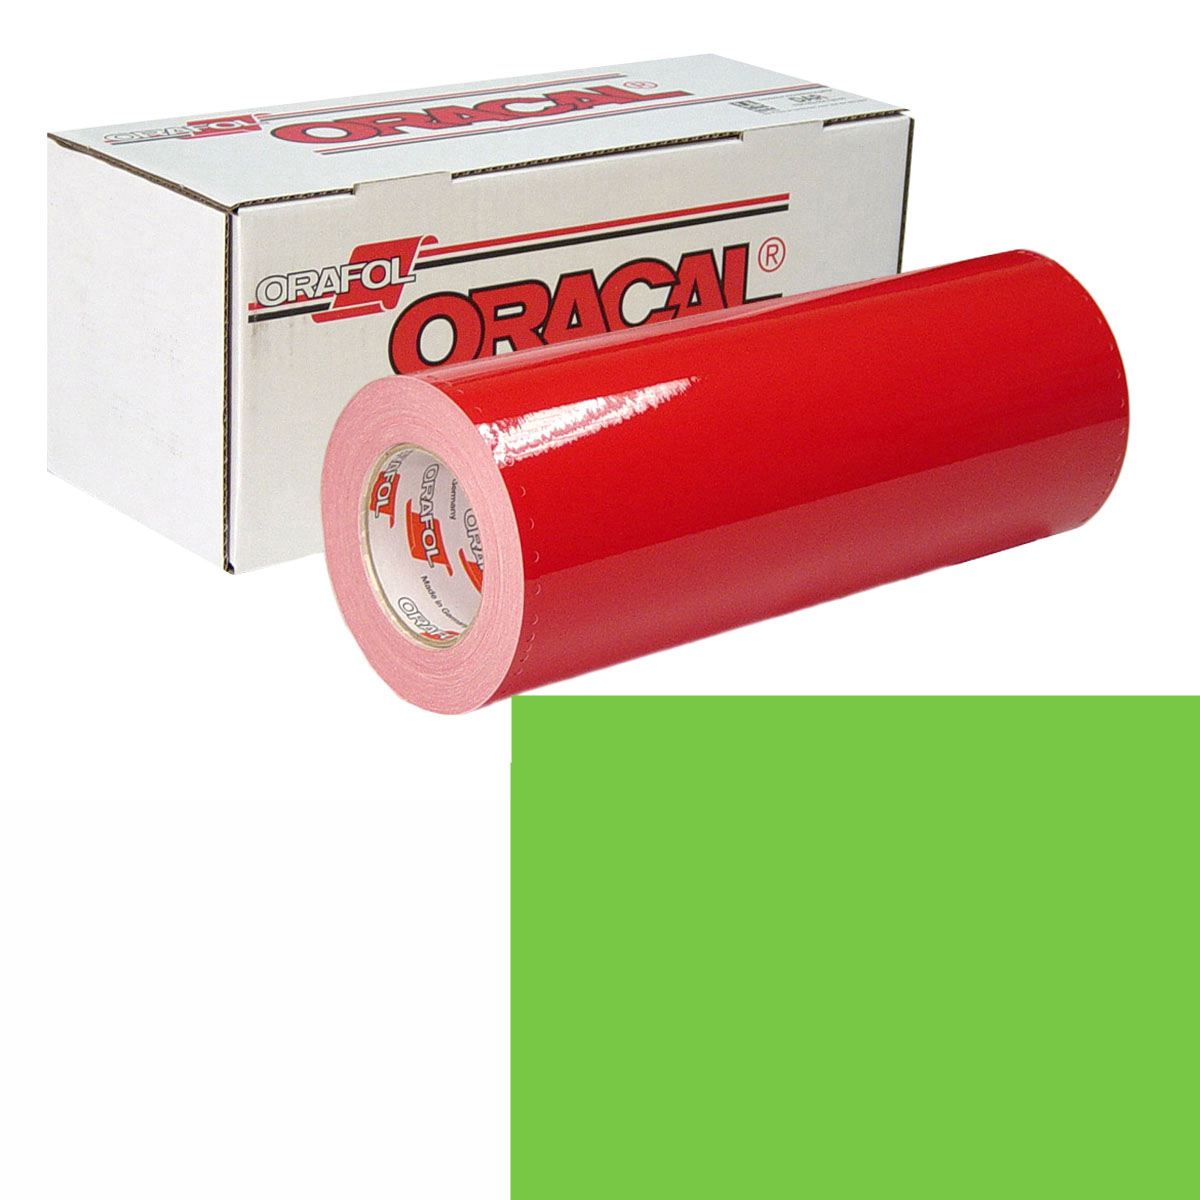 ORACAL 951 15in X 10yd 601 Lime Green